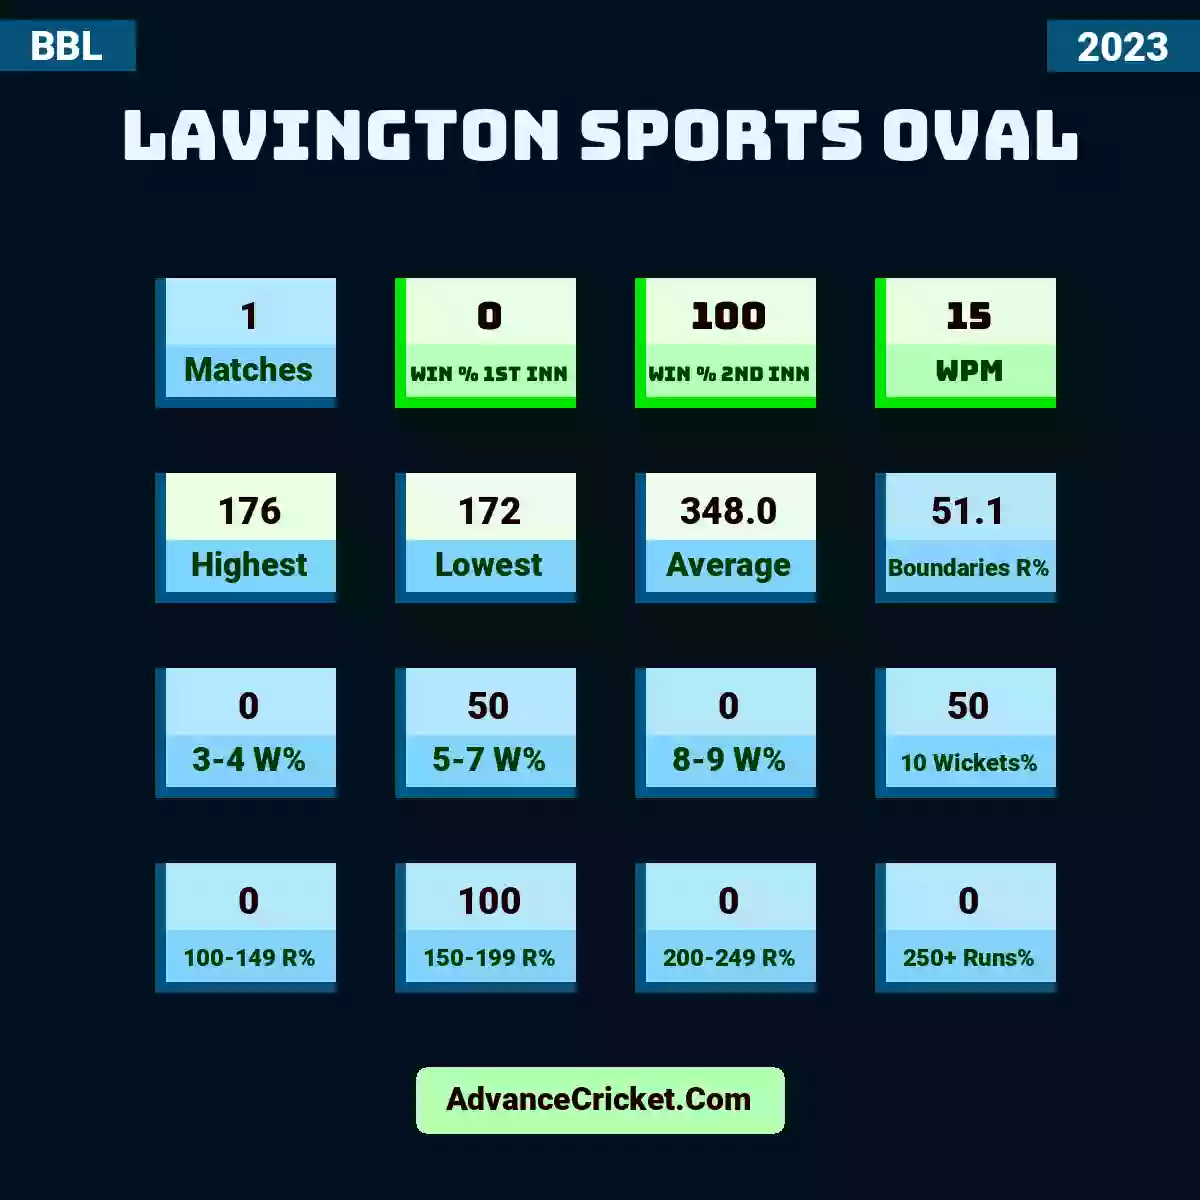 Image showing Lavington Sports Oval with Matches: 1, Win % 1st Inn: 0, Win % 2nd Inn: 100, WPM: 15, Highest: 176, Lowest: 172, Average: 348.0, Boundaries R%: 51.1, 3-4 W%: 0, 5-7 W%: 50, 8-9 W%: 0, 10 Wickets%: 50, 100-149 R%: 0, 150-199 R%: 100, 200-249 R%: 0, 250+ Runs%: 0.